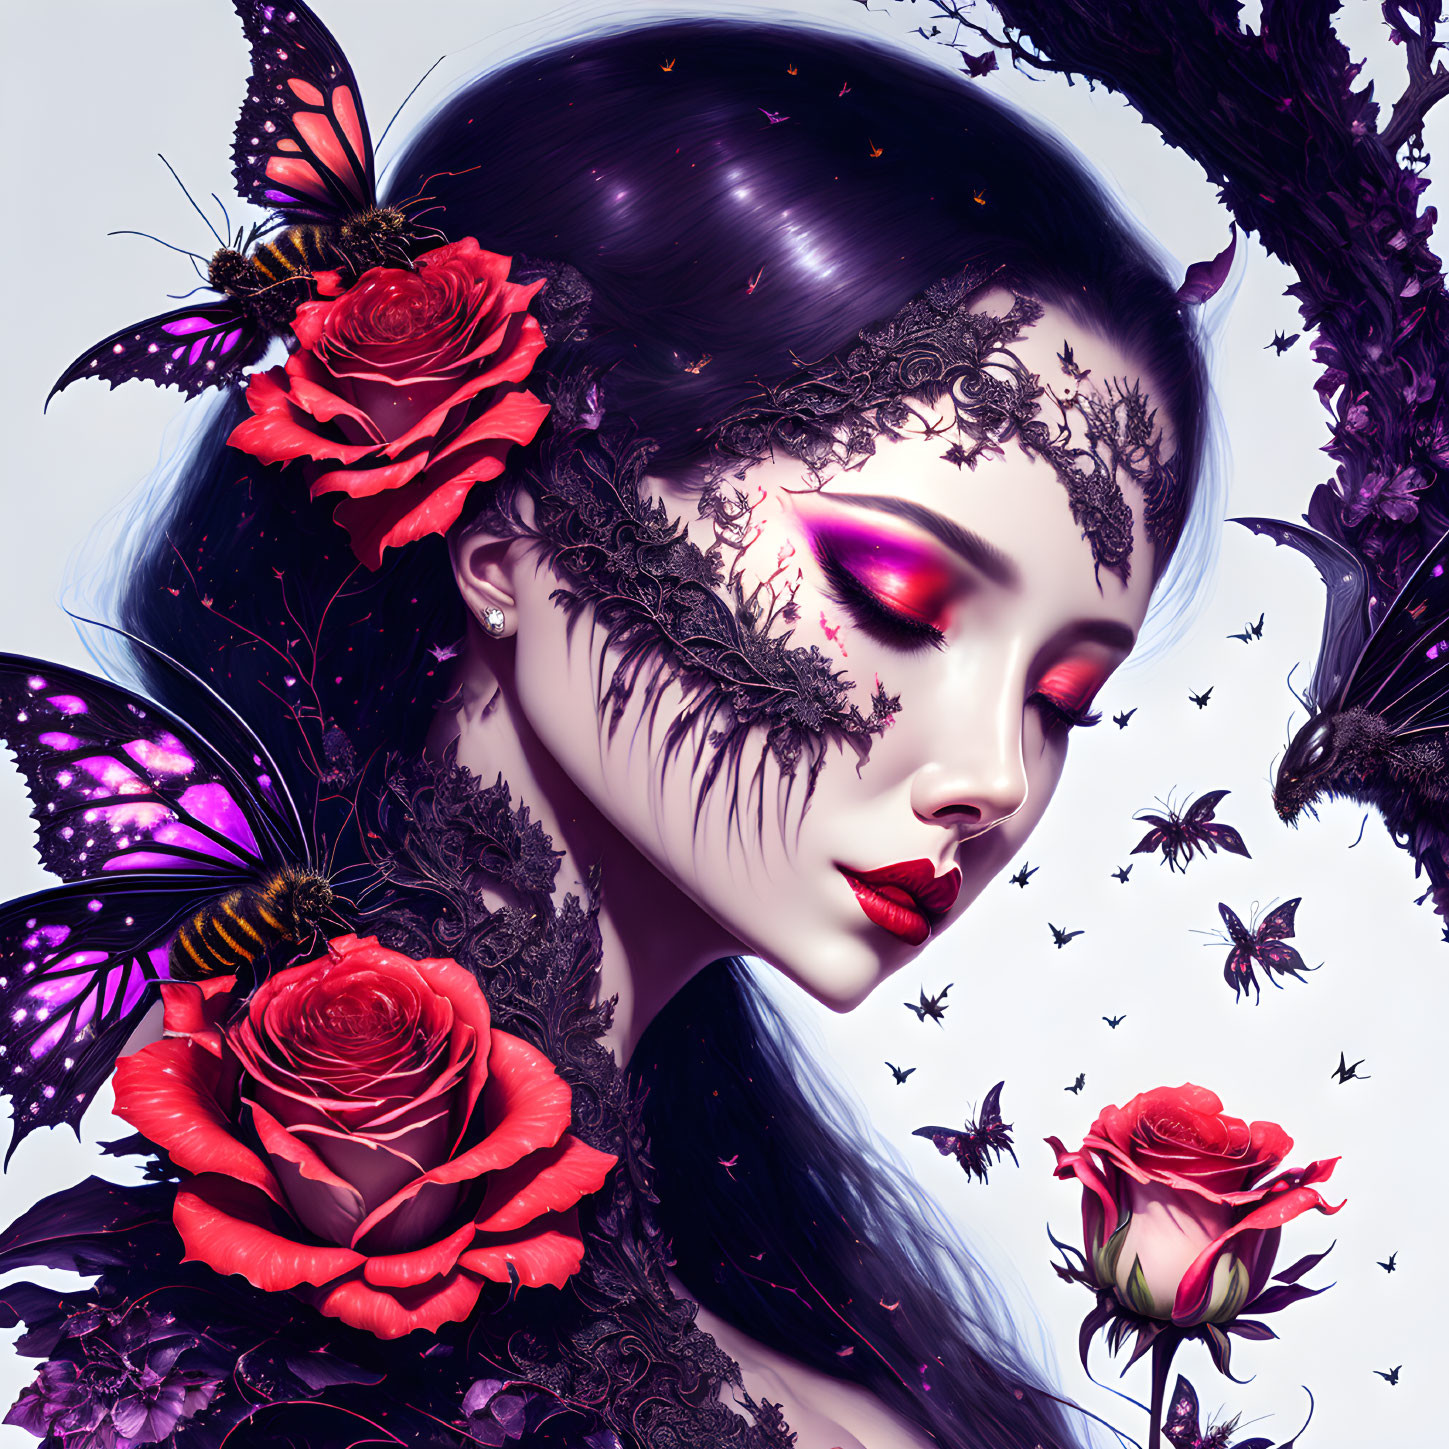 Woman with Roses and Butterflies: Dark Hair, Vibrant Makeup, Serene Expression